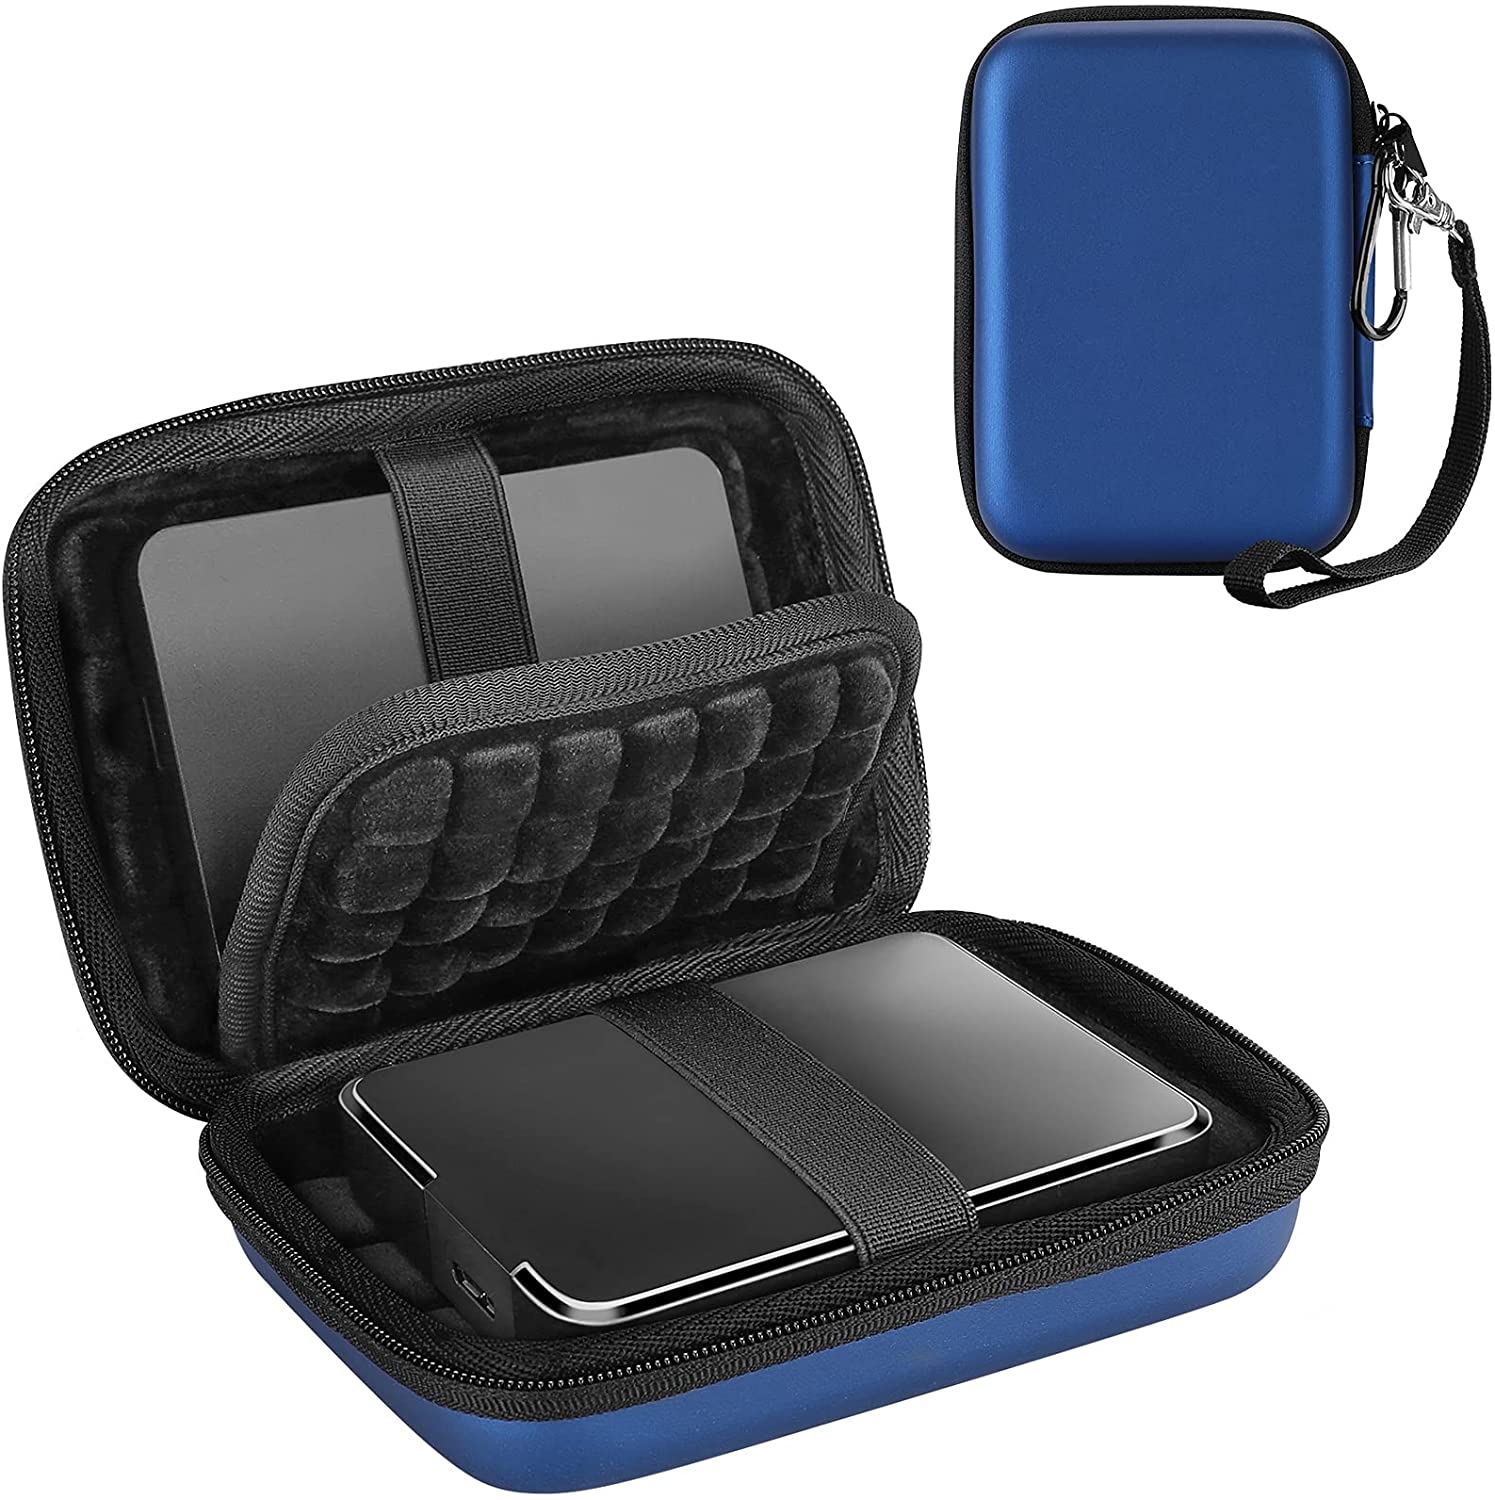 SDD External Drive Case for Samsung T5 T3/ for Seagate Portable Hard Drive  and Accessories, Box Only 